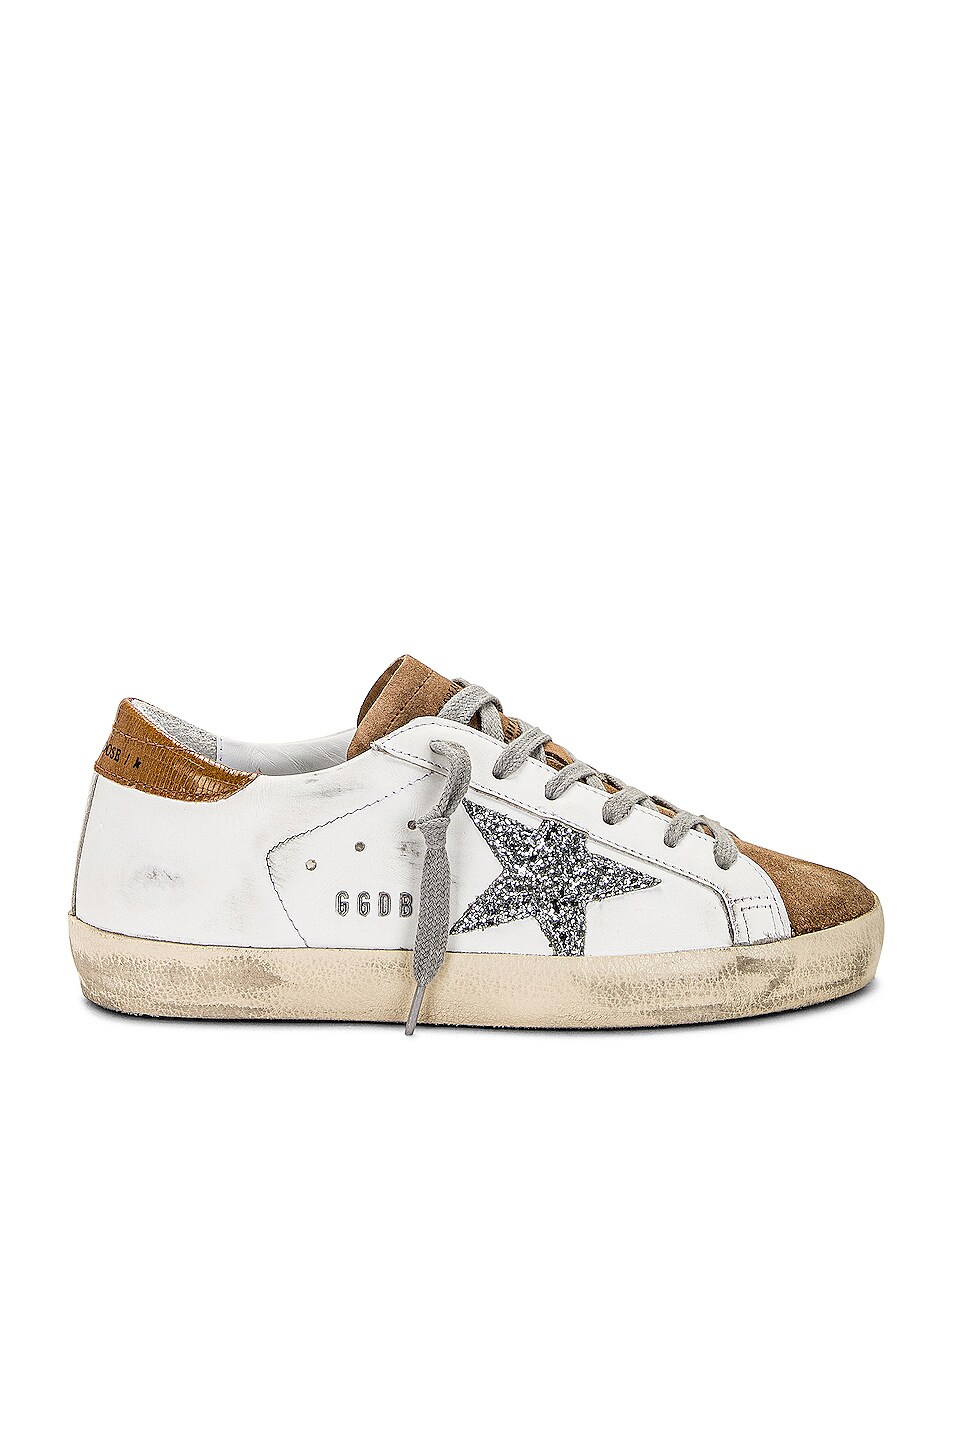 Image 1 of Golden Goose Superstar Sneaker in White, Tobacco, Silver, & Taupe